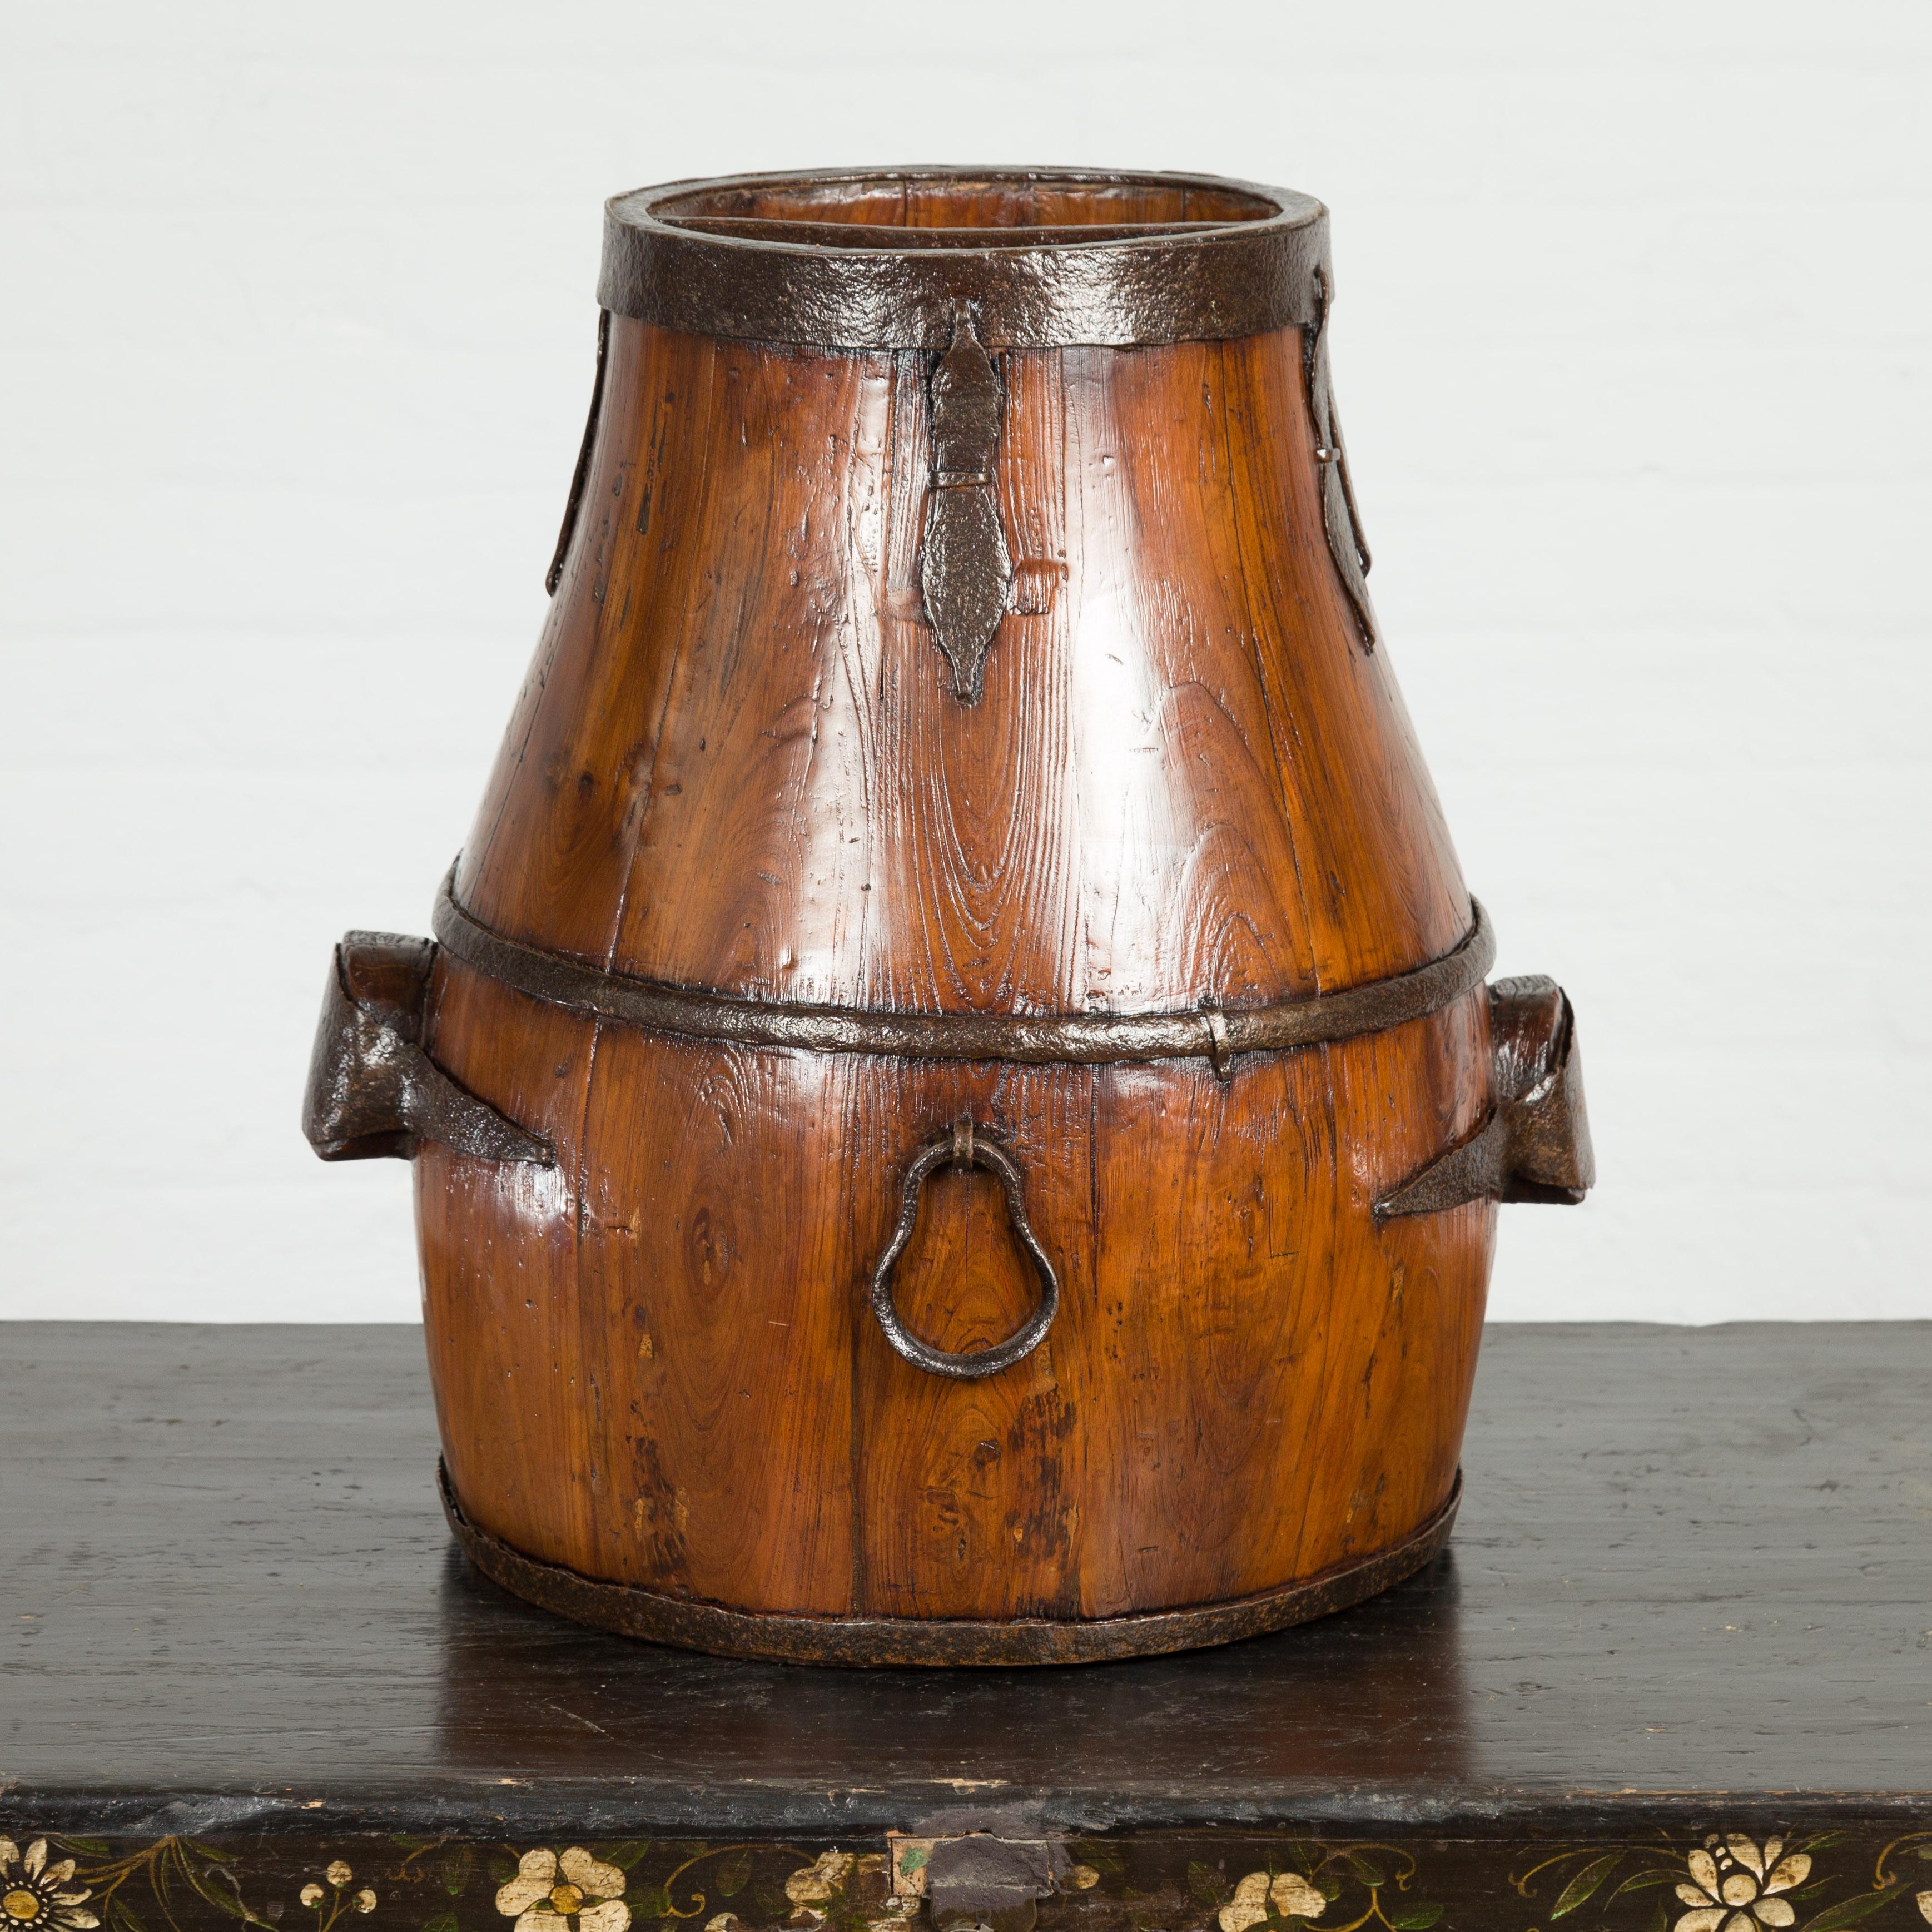 An antique Chinese Qing Dynasty period handmade pear shaped wooden grain basket from the 19th century, with varnished finish and iron hardware. Created in China during the Qing Dynasty period in the 19th century, this handmade grain basket features